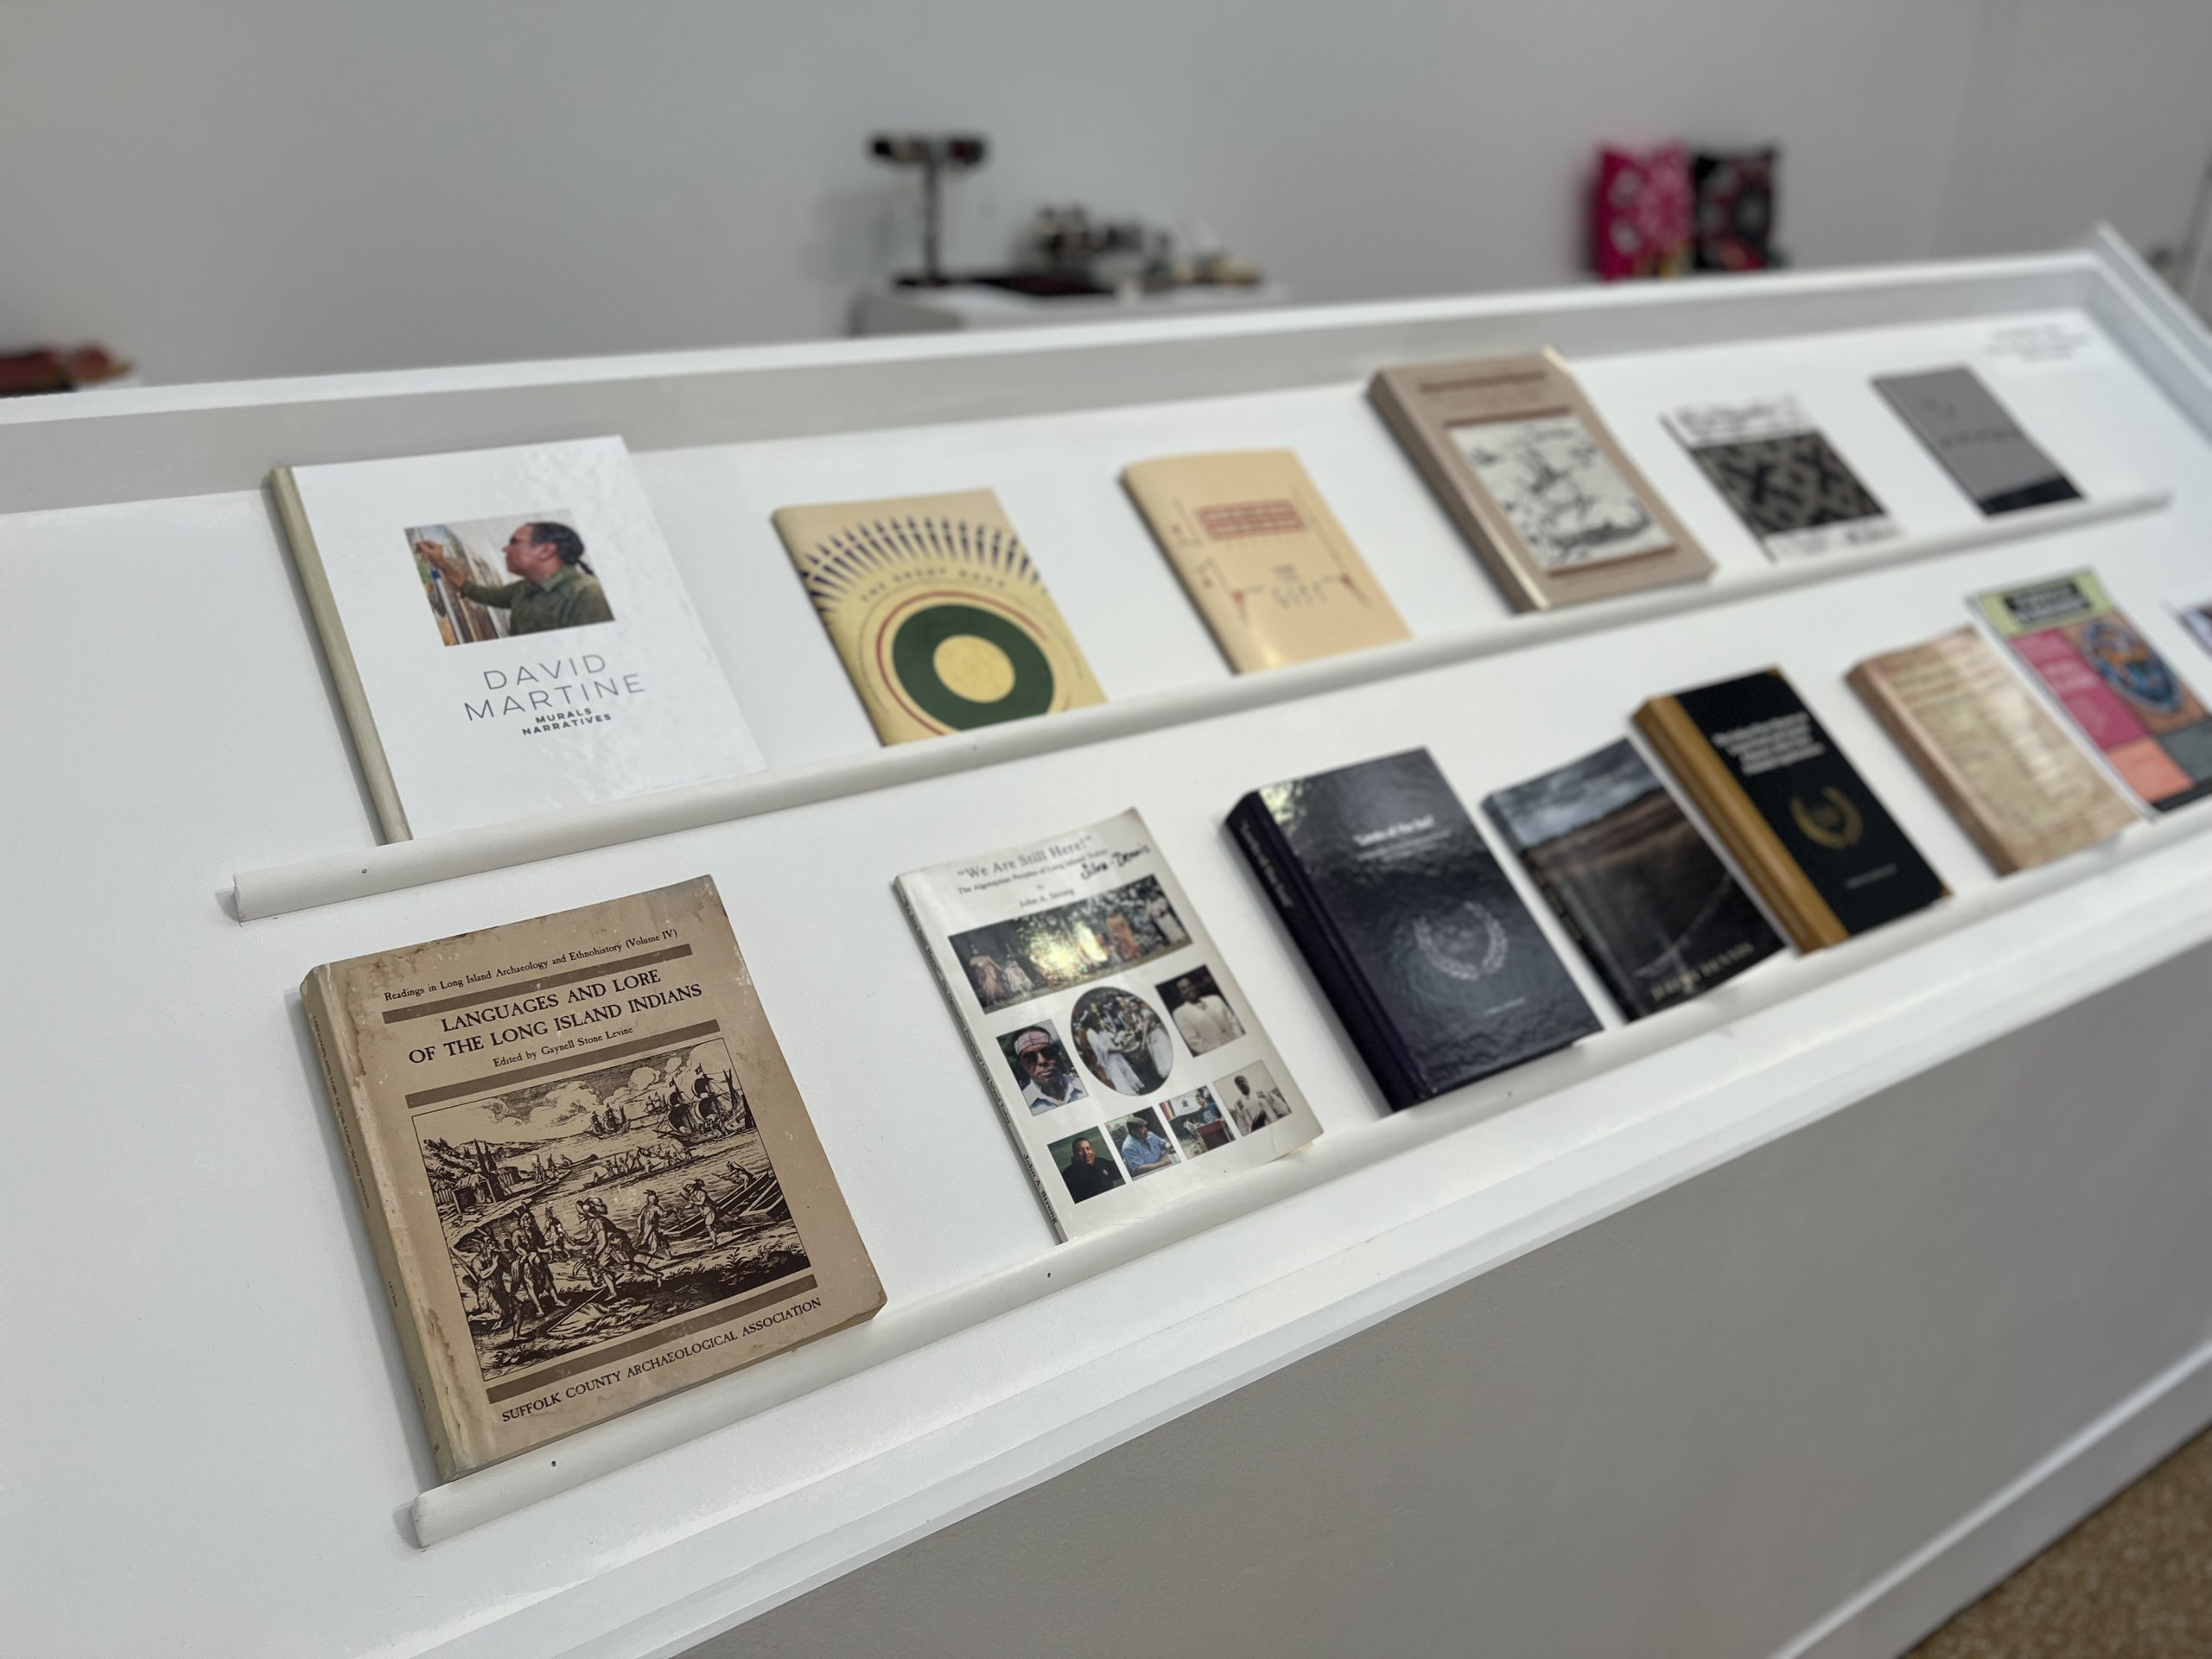 A book display is included in the Southampton Arts Center exhibition 